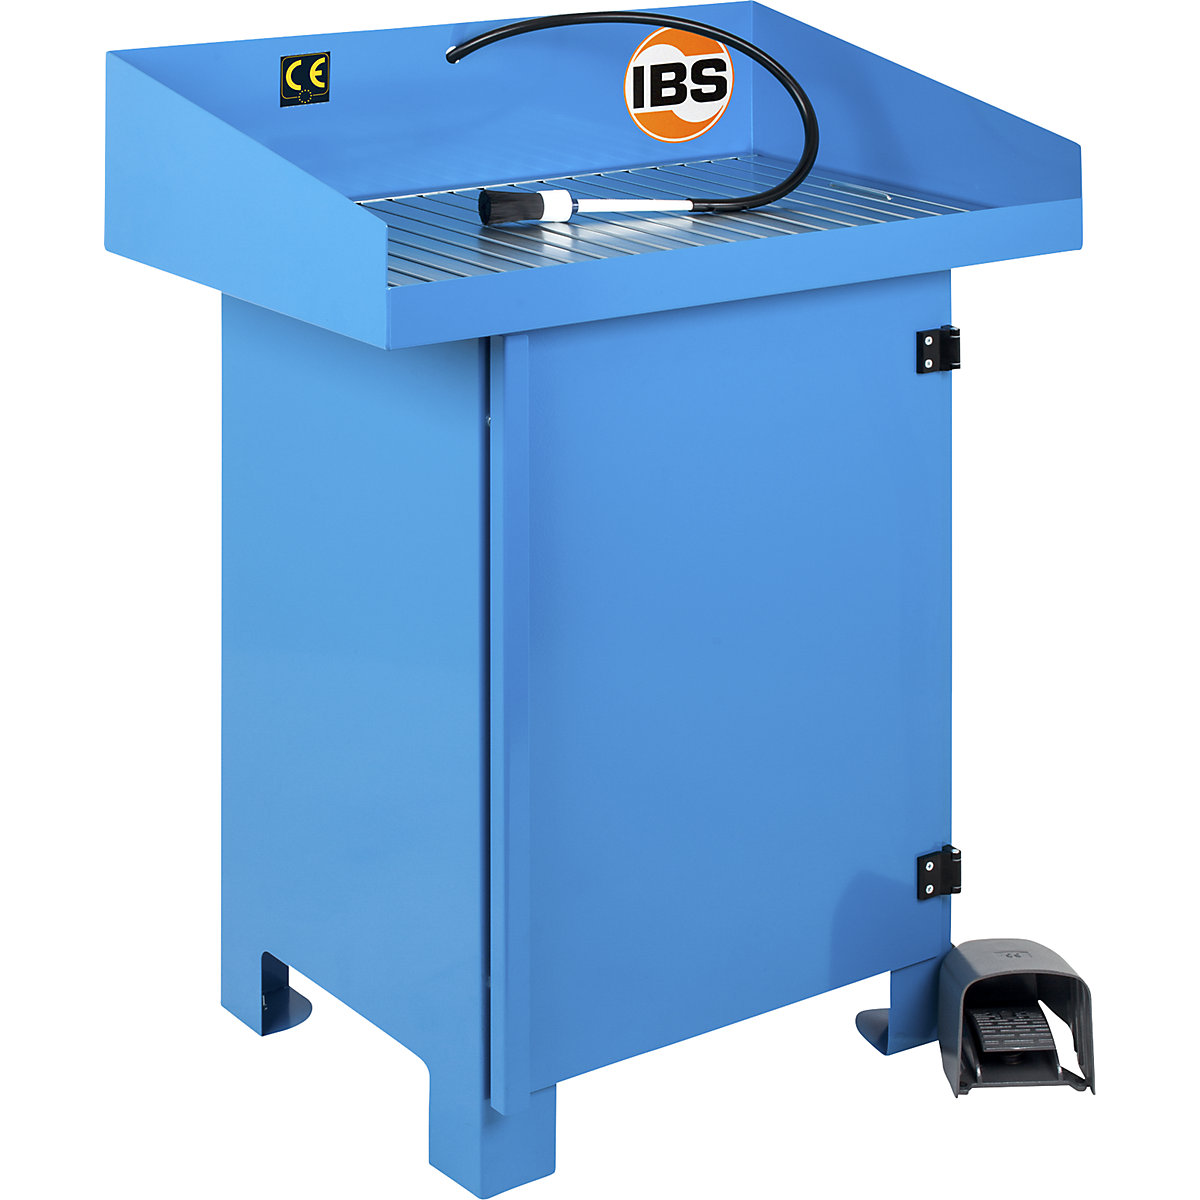 Free standing parts cleaner, closed – IBS Scherer